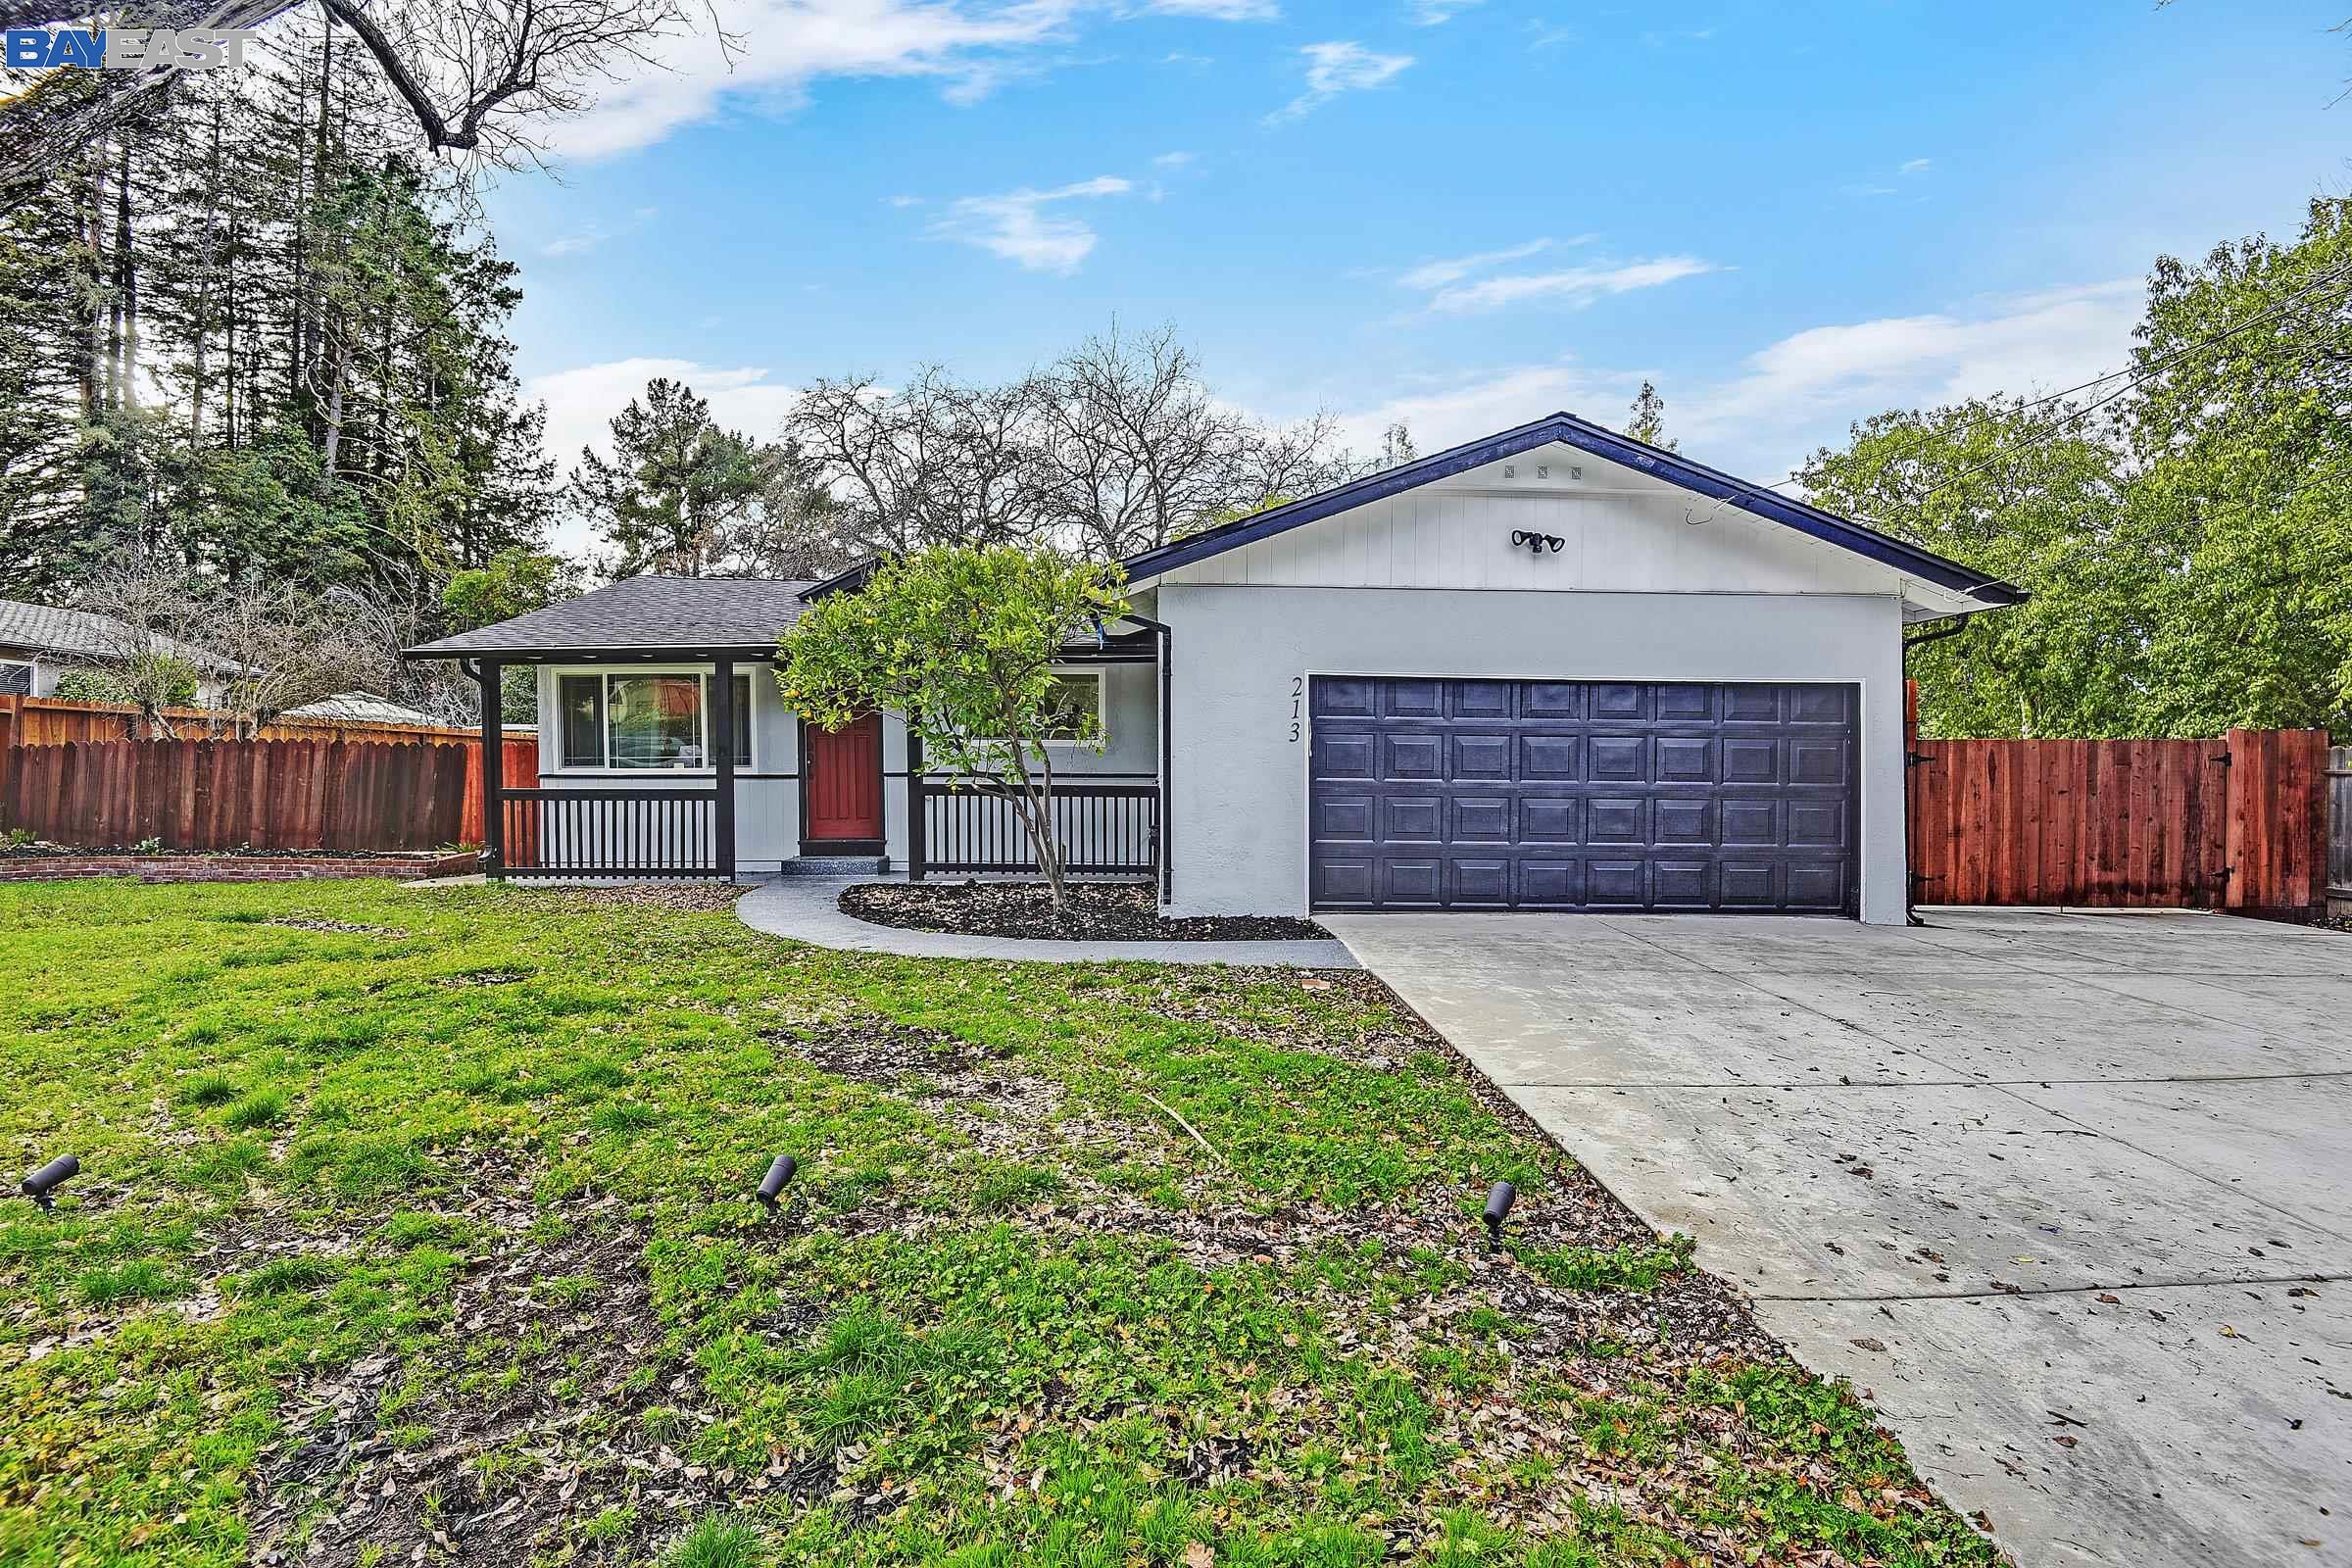 Located in the highly sought Pleasant Hill ~ Remodeled home, Turnkey~, 3 bed 2 Baths~1302 sq ft of living area~ 9,951s1 ft lot! ~ upgrades such as New driveway, new fences, new gate, new windows, new kitchen, remodeled Baths, new title and waterproof laminate, refinish original hardwood floors, 2 new balconies, new electrical, tons of light, freshly painted in and out, new exterior front landscape. Located within driving distance from Downtown Walnut Creek and Lafayette~ Nice quiet location~ come and visit to the open house Sat 01/22 and Sunday 01/23~ 1-4pm